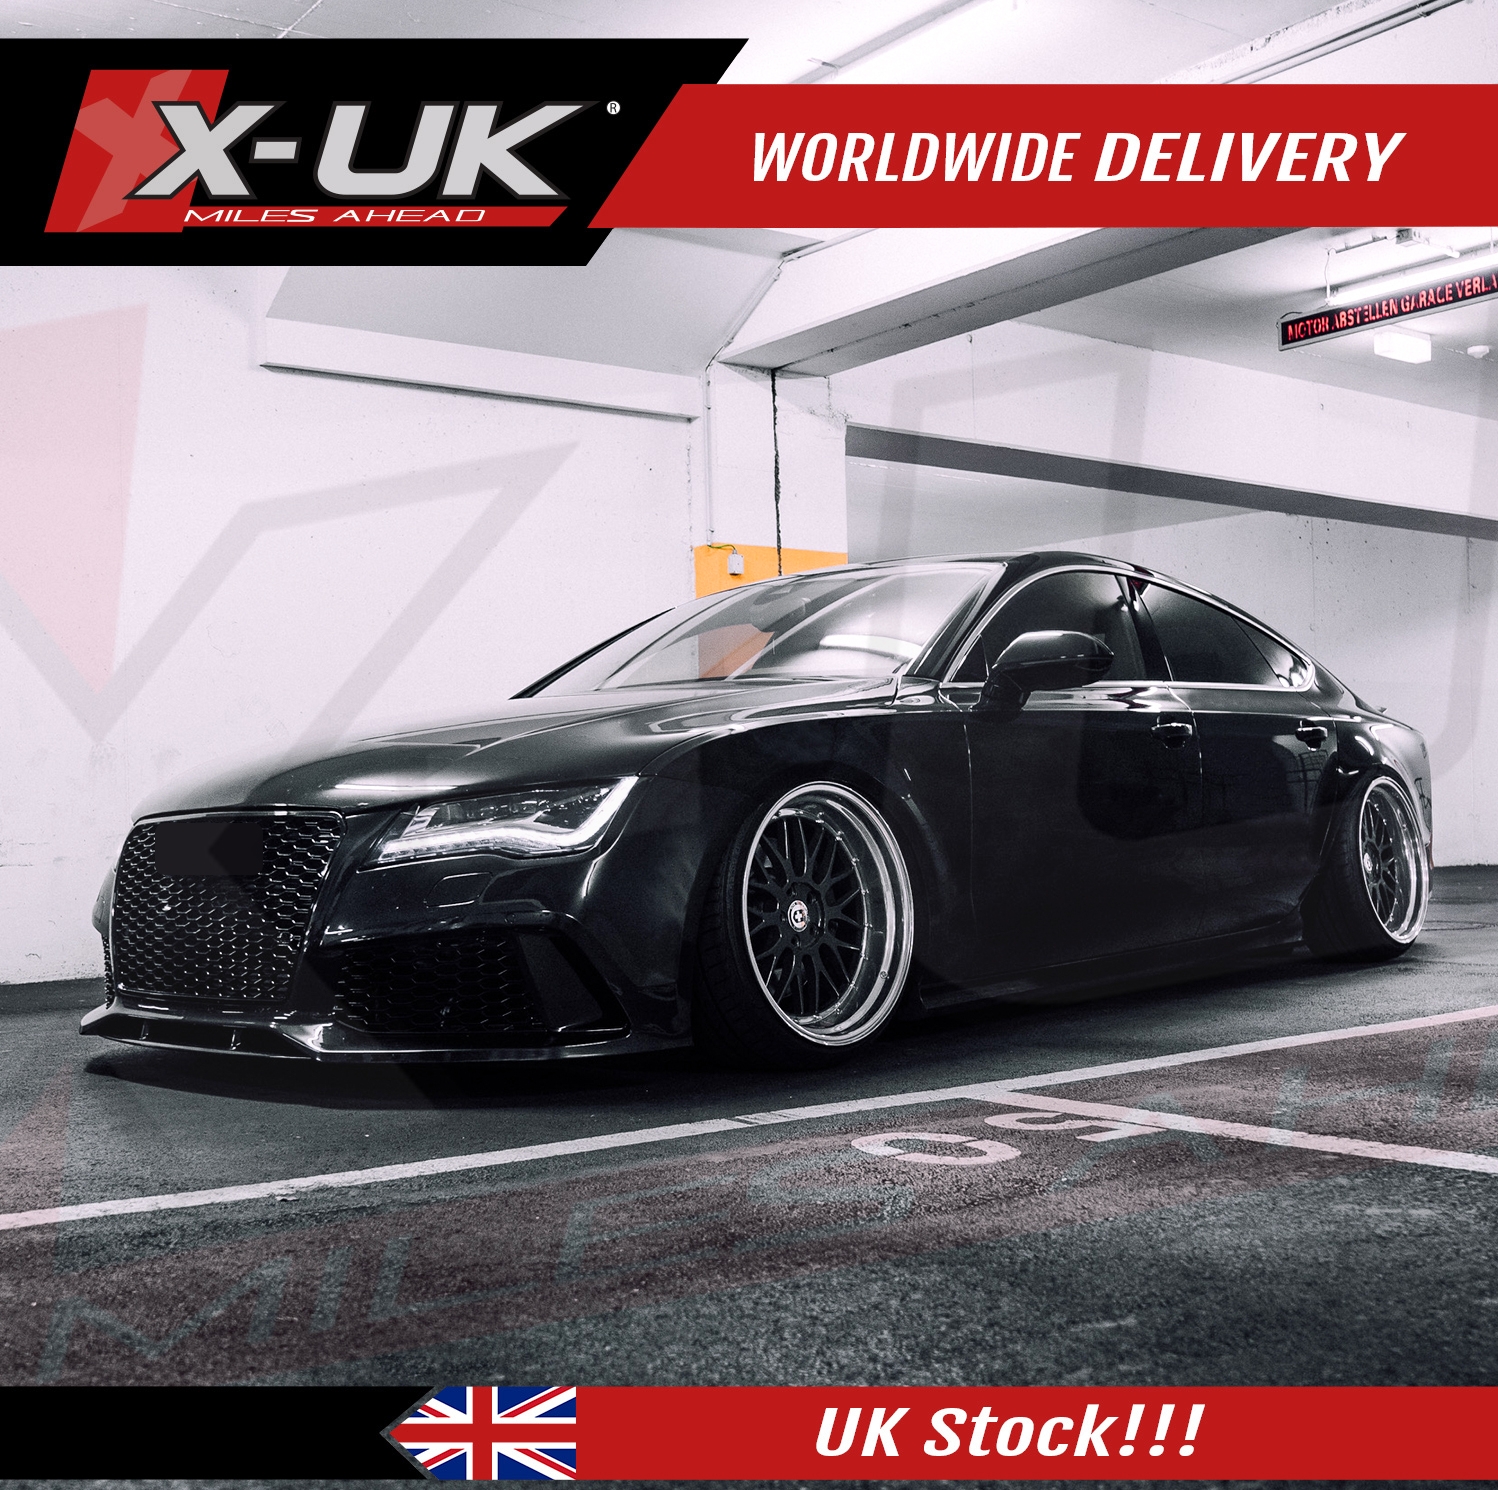 Audi Rs7 Style Front Bumper Upgrade For Audi A7 S7 Rs7 2011-2014 Pre Facelift – With A Front Grill Camera Bracket – X-UK Ltd